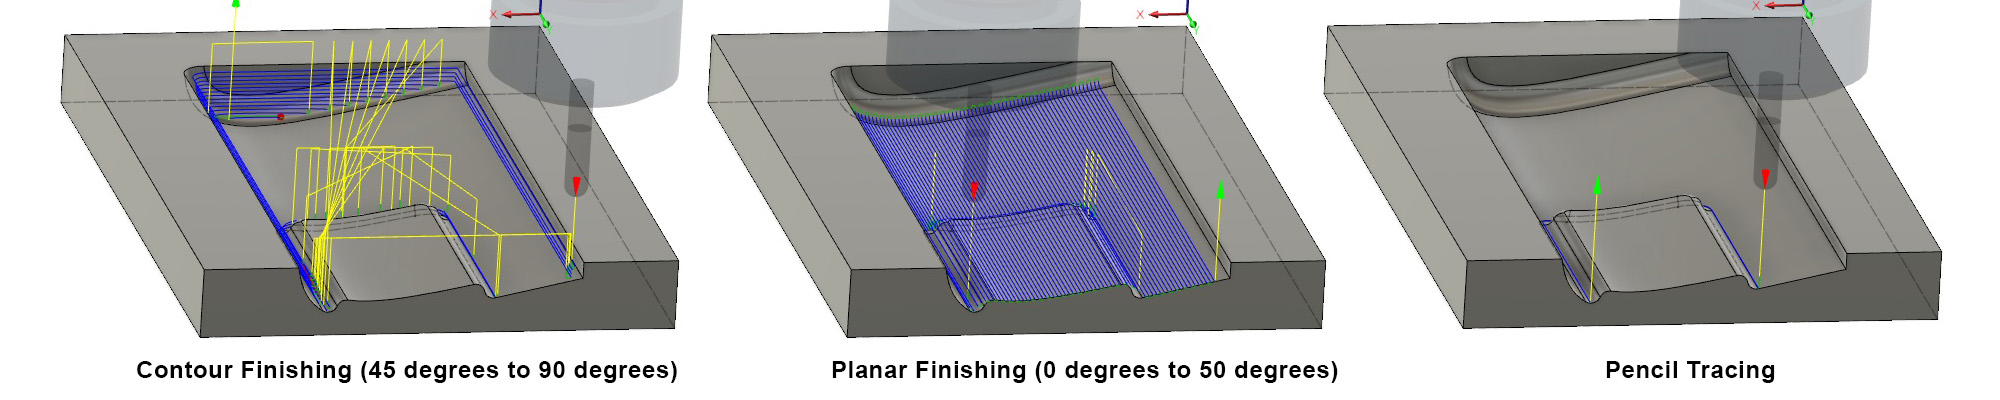 basic machining strategy for MDF molds: roughing, finishing steep parts then finishing shallow parts